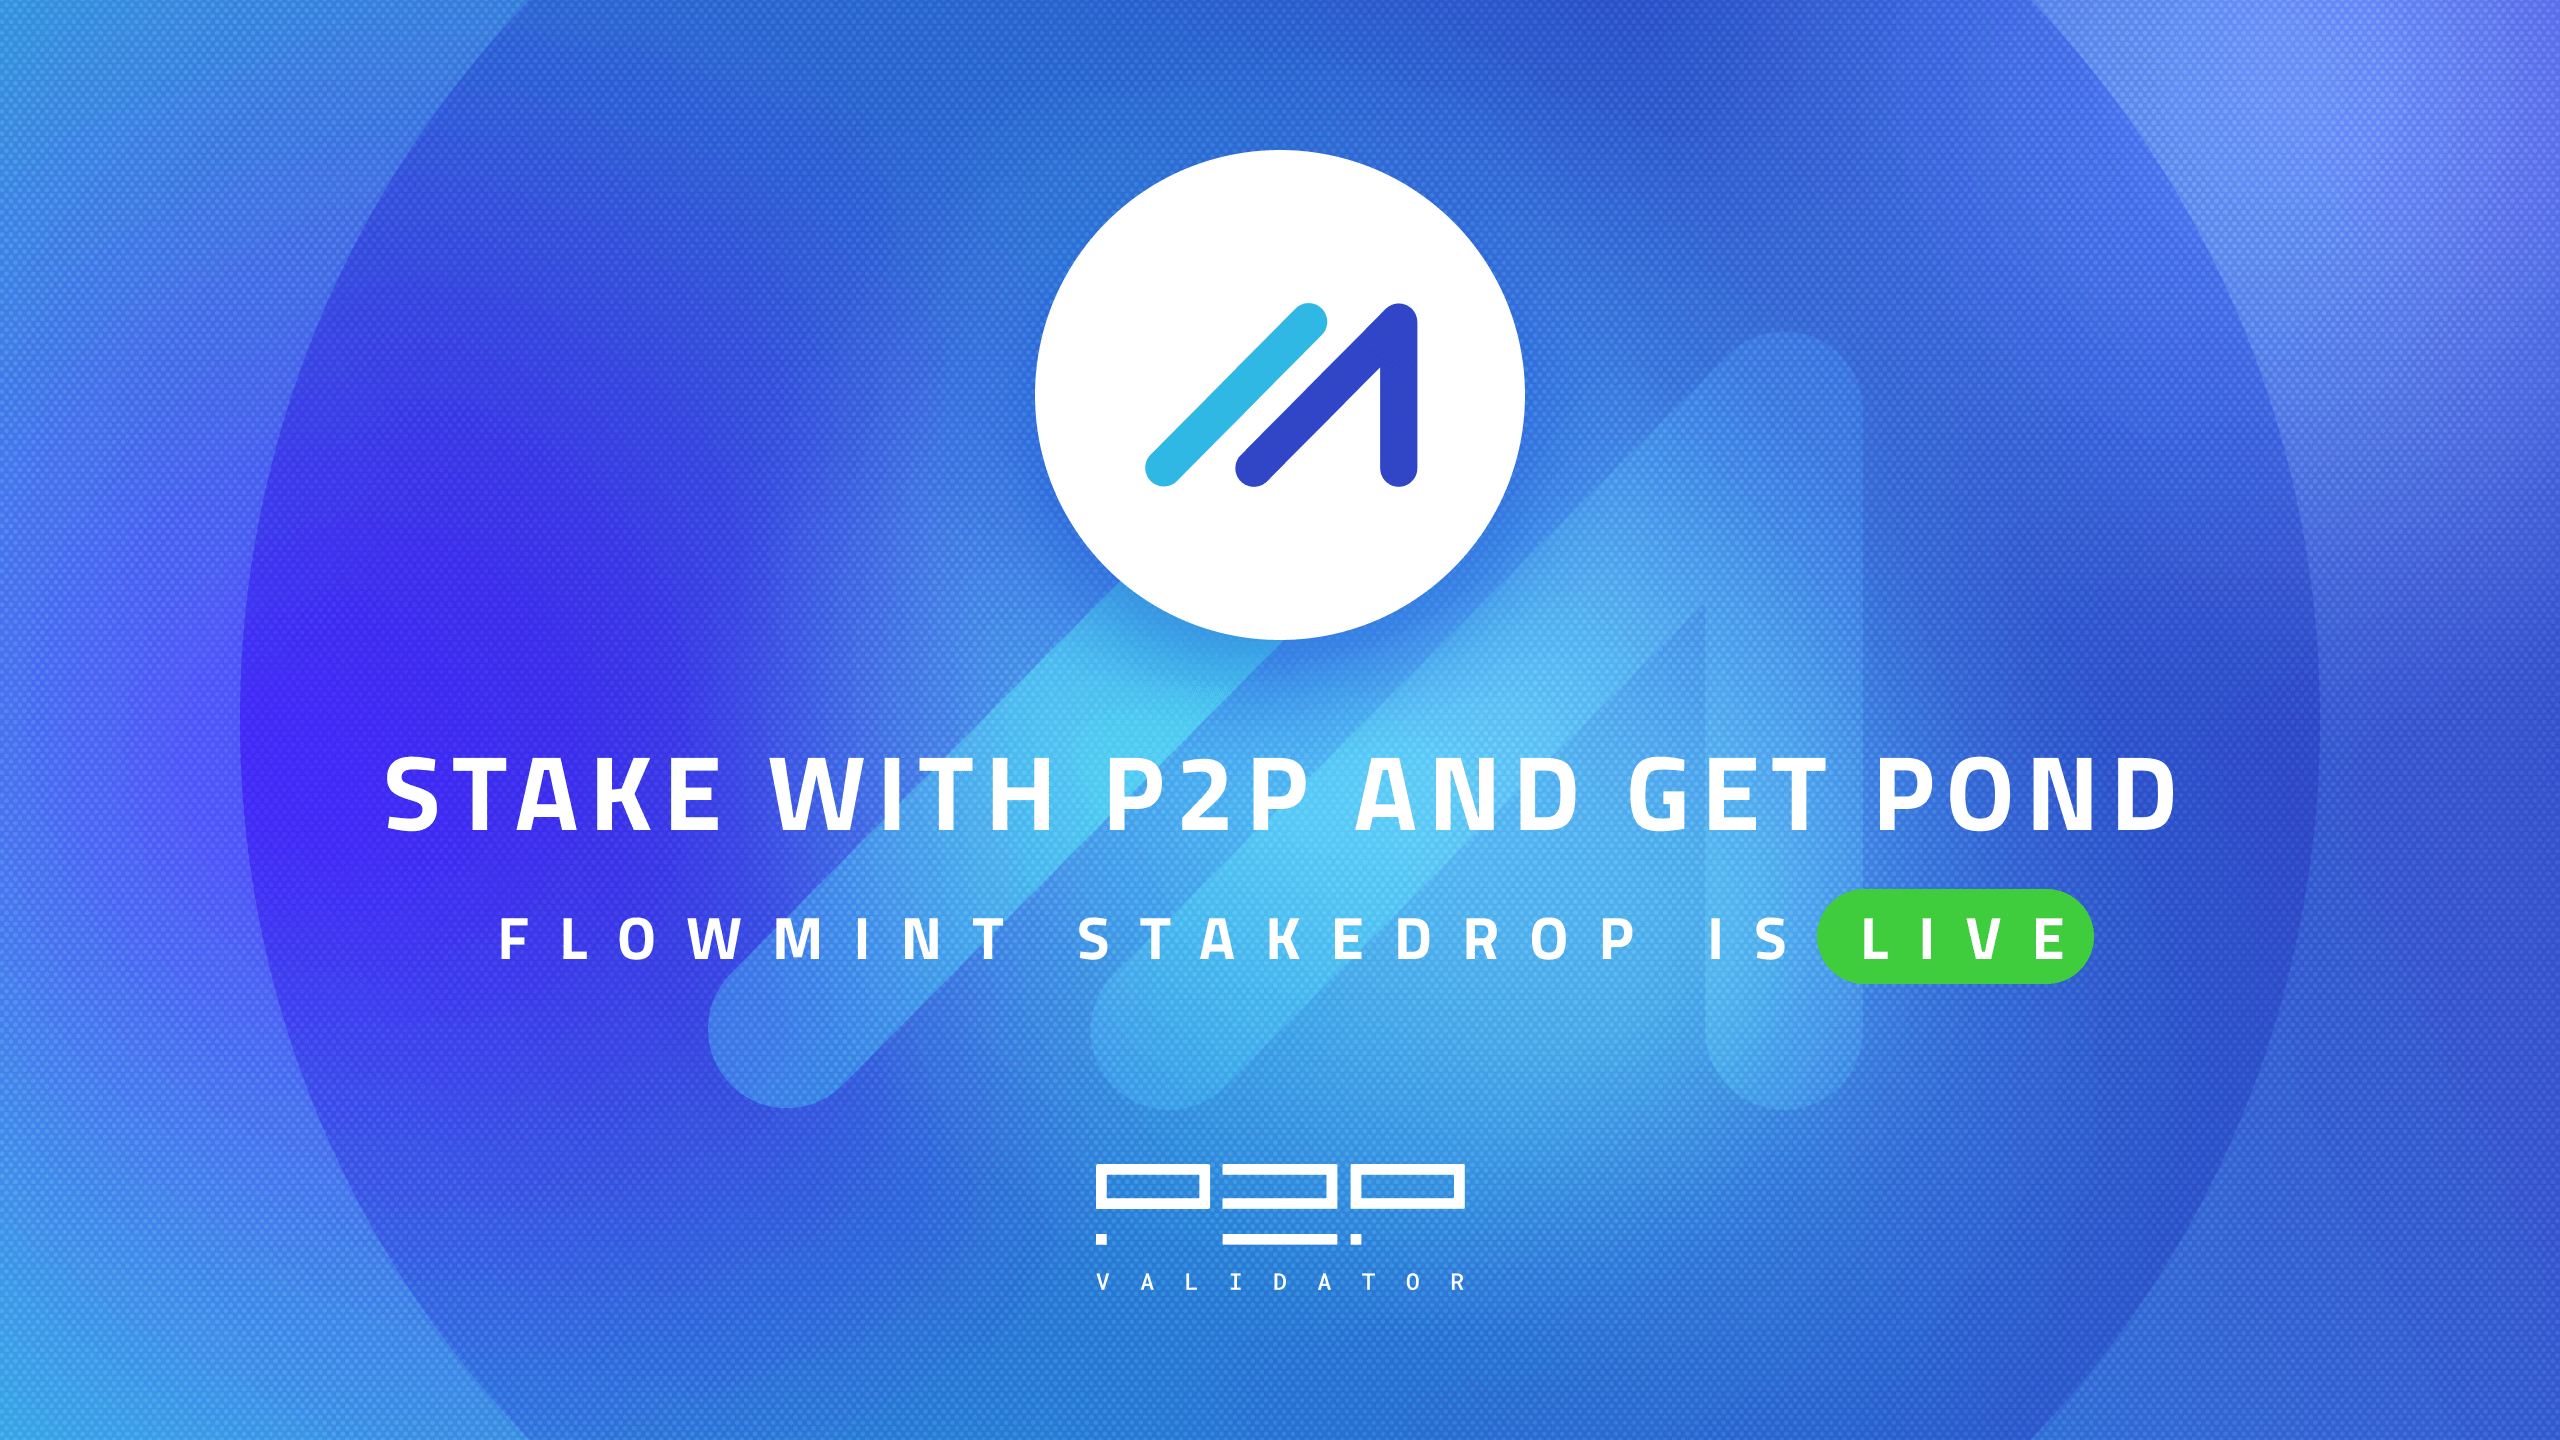 Stake with P2P and earn POND with the FlowMint Stakedrop